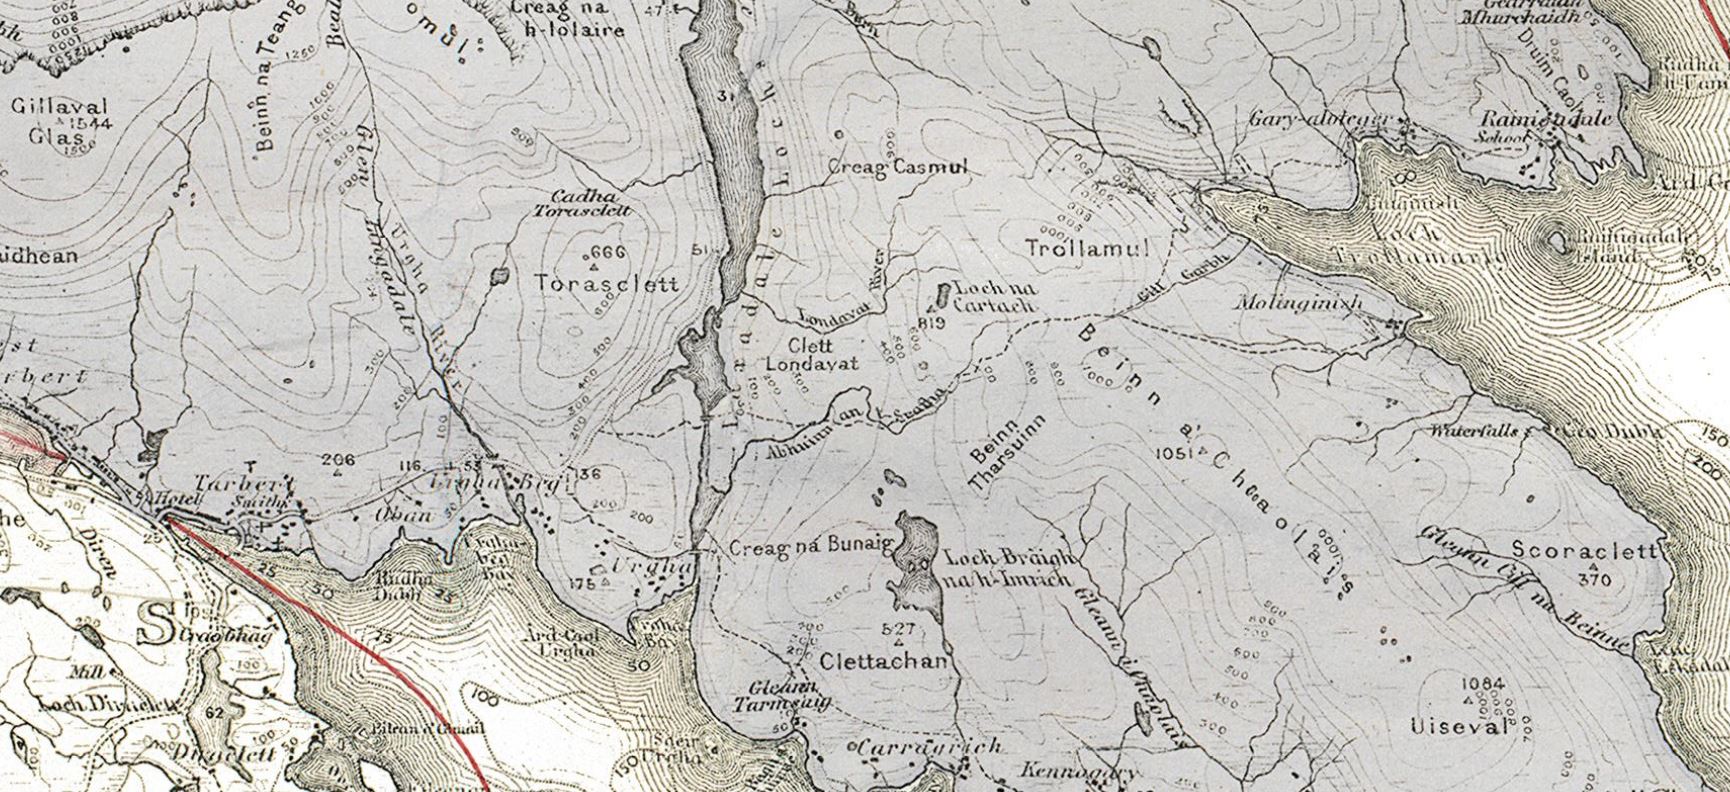 This map shows Reinigeadal at the top right corner of the image and Tarbet at the bottom left. The Postman's Path is depicted broken line. Detail of Register of Sasine plan of Harris. NRS ref.: RS230/280 by a